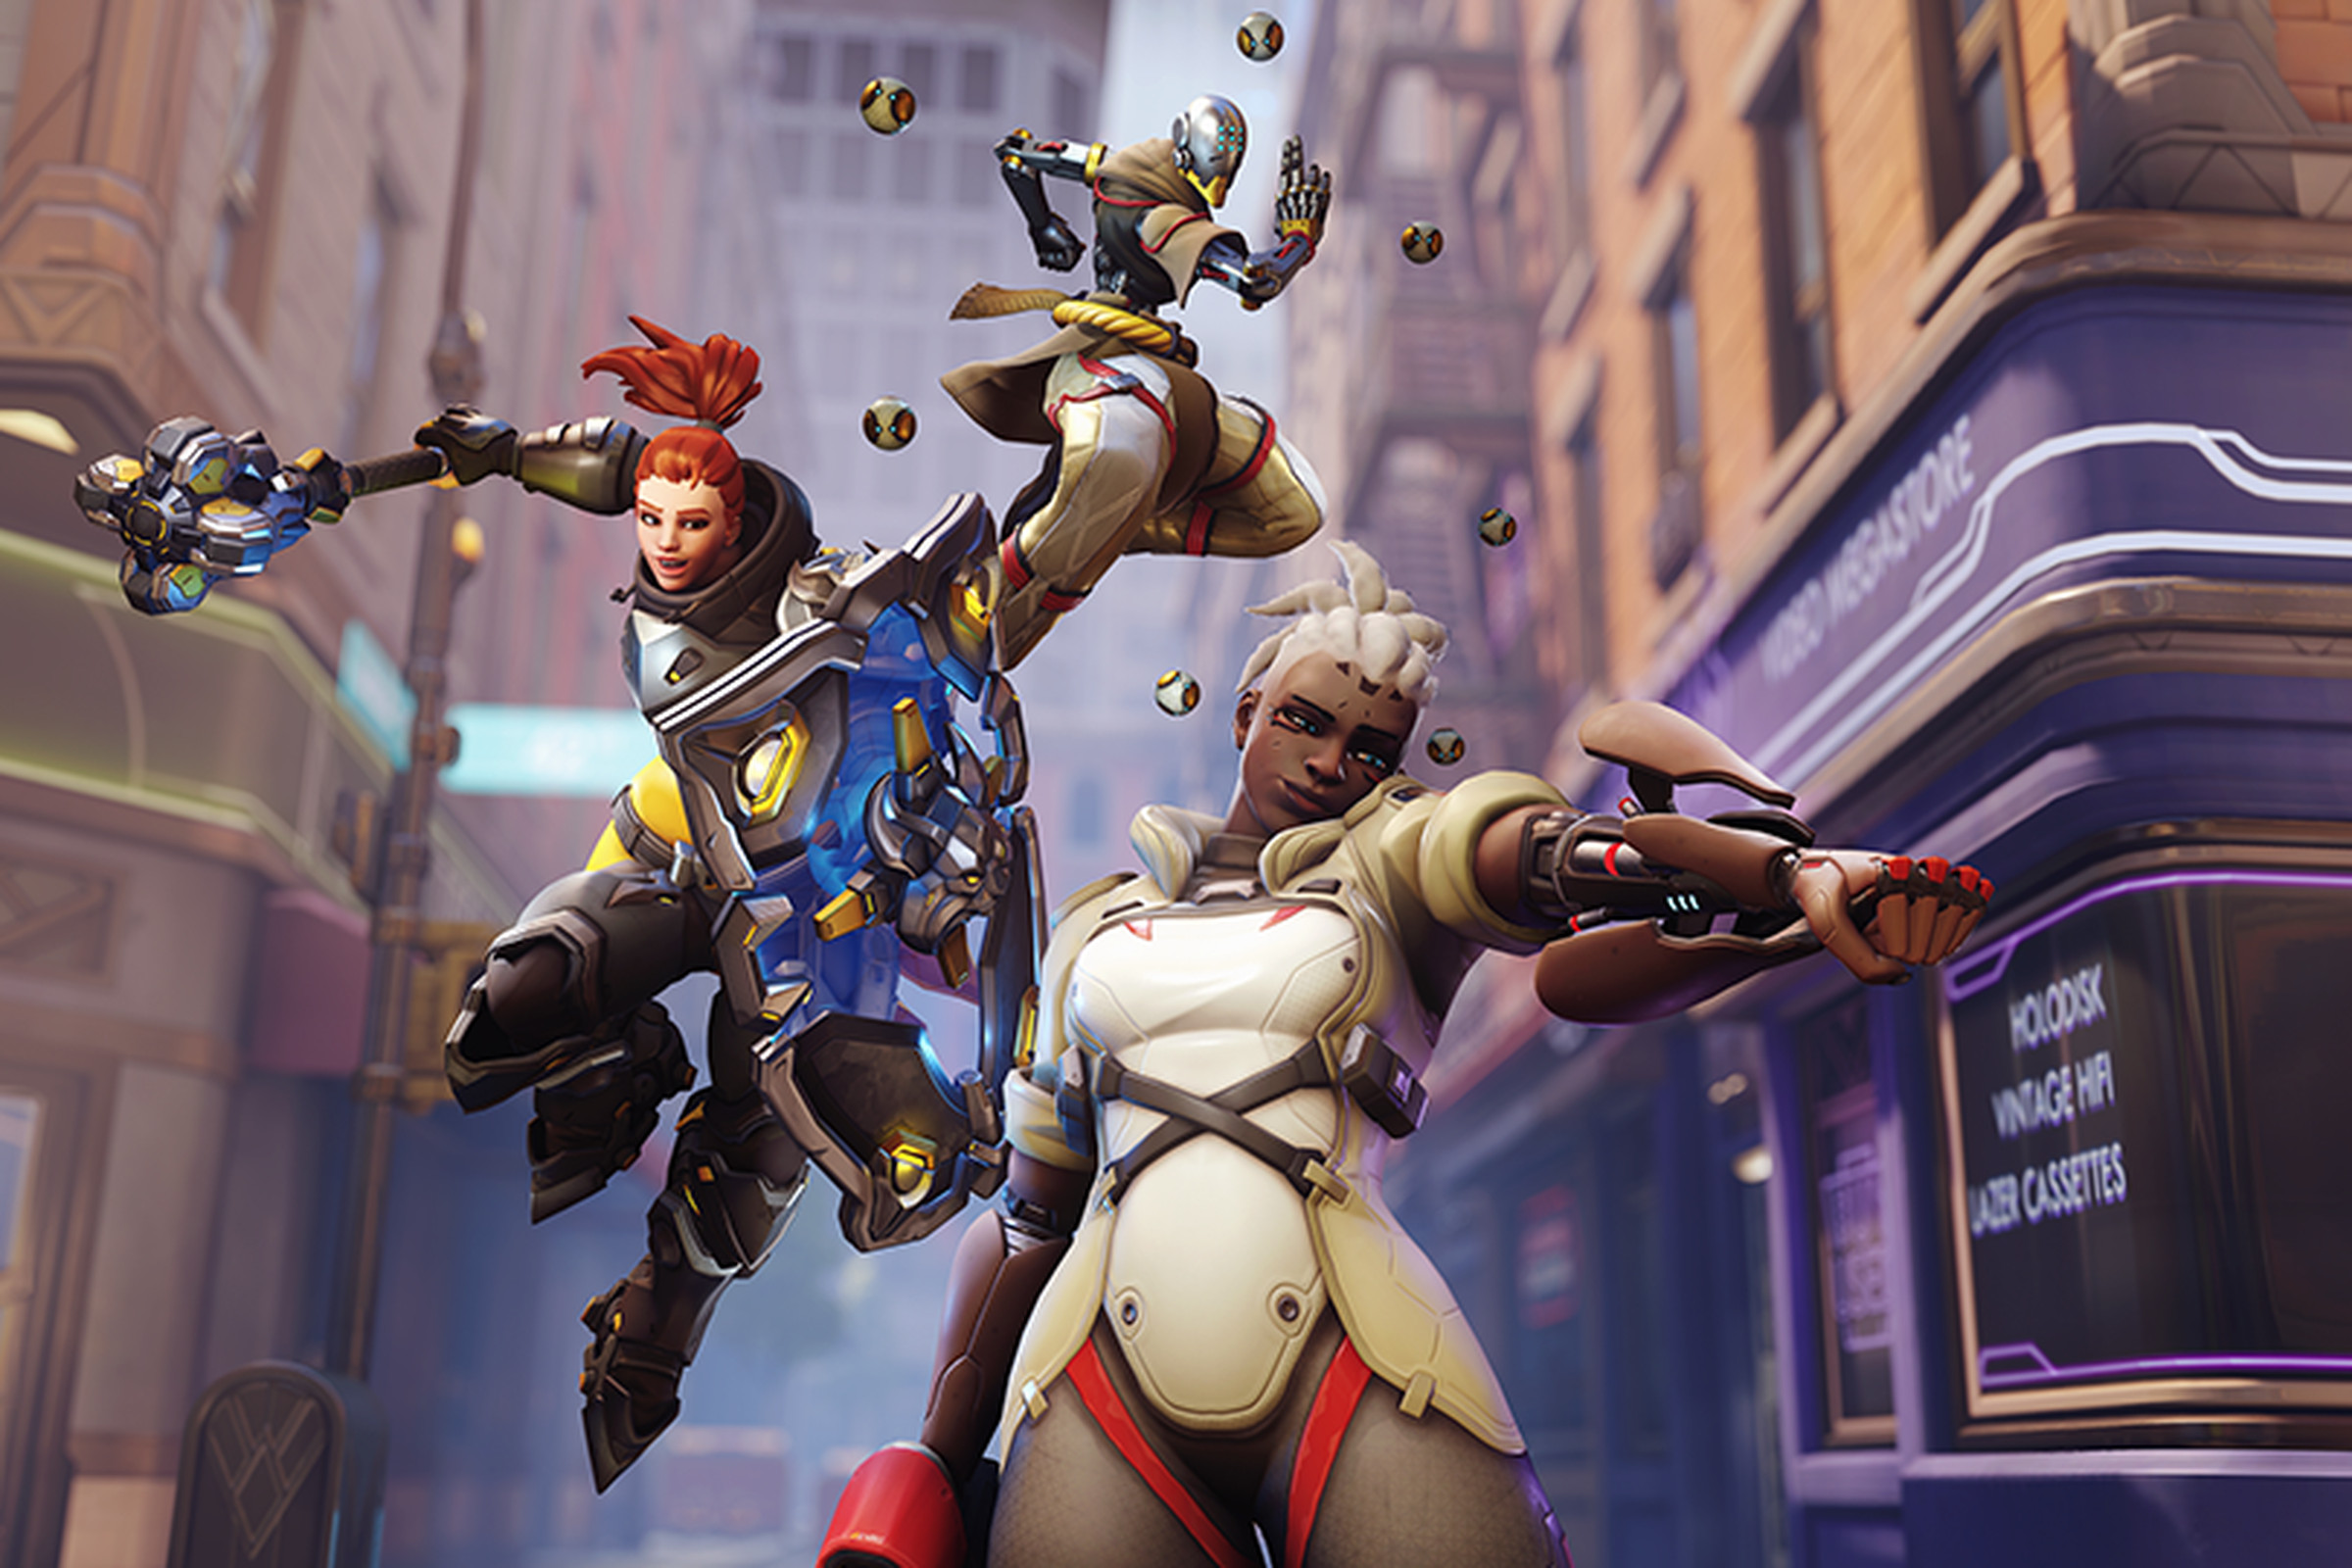 Promotional image from Overwatch 2 featuring heroes Sojourn, Brigitte, and Zenyatta in action poses.